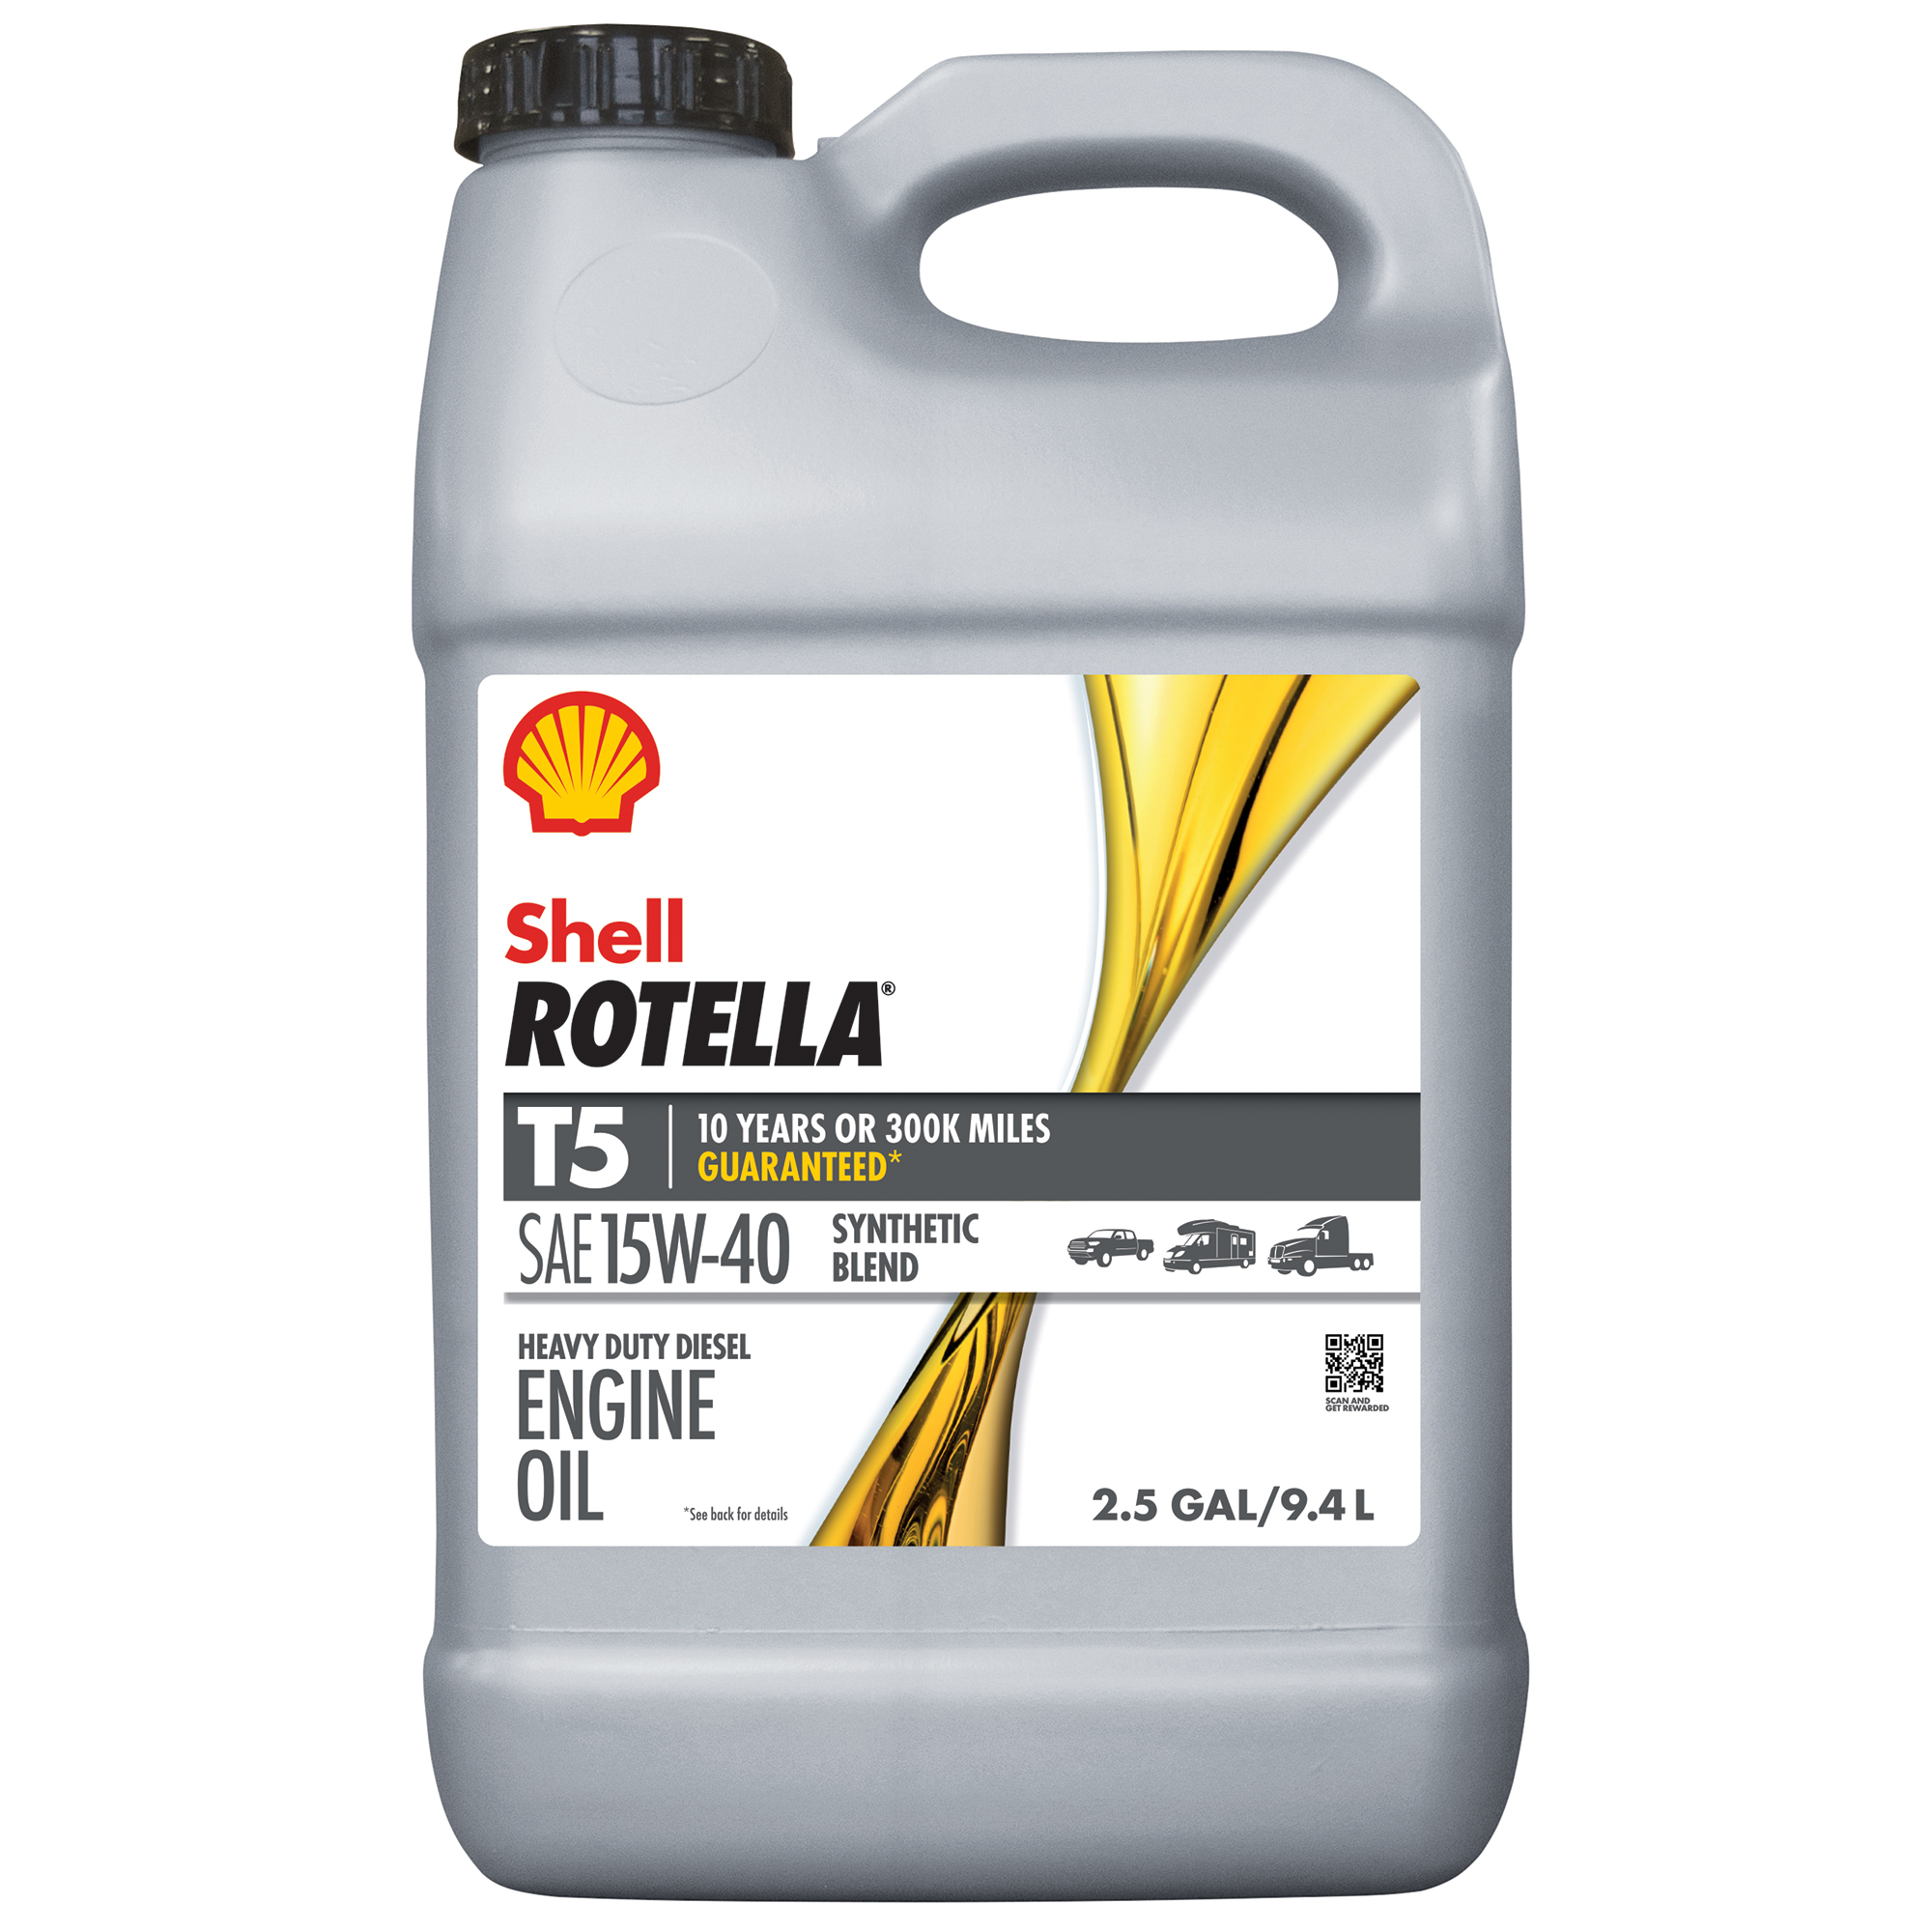 Shell Rotella T5 Synthetic Blend 15W-40 Diesel Engine Oil, 2.5 Gallon - image 1 of 9